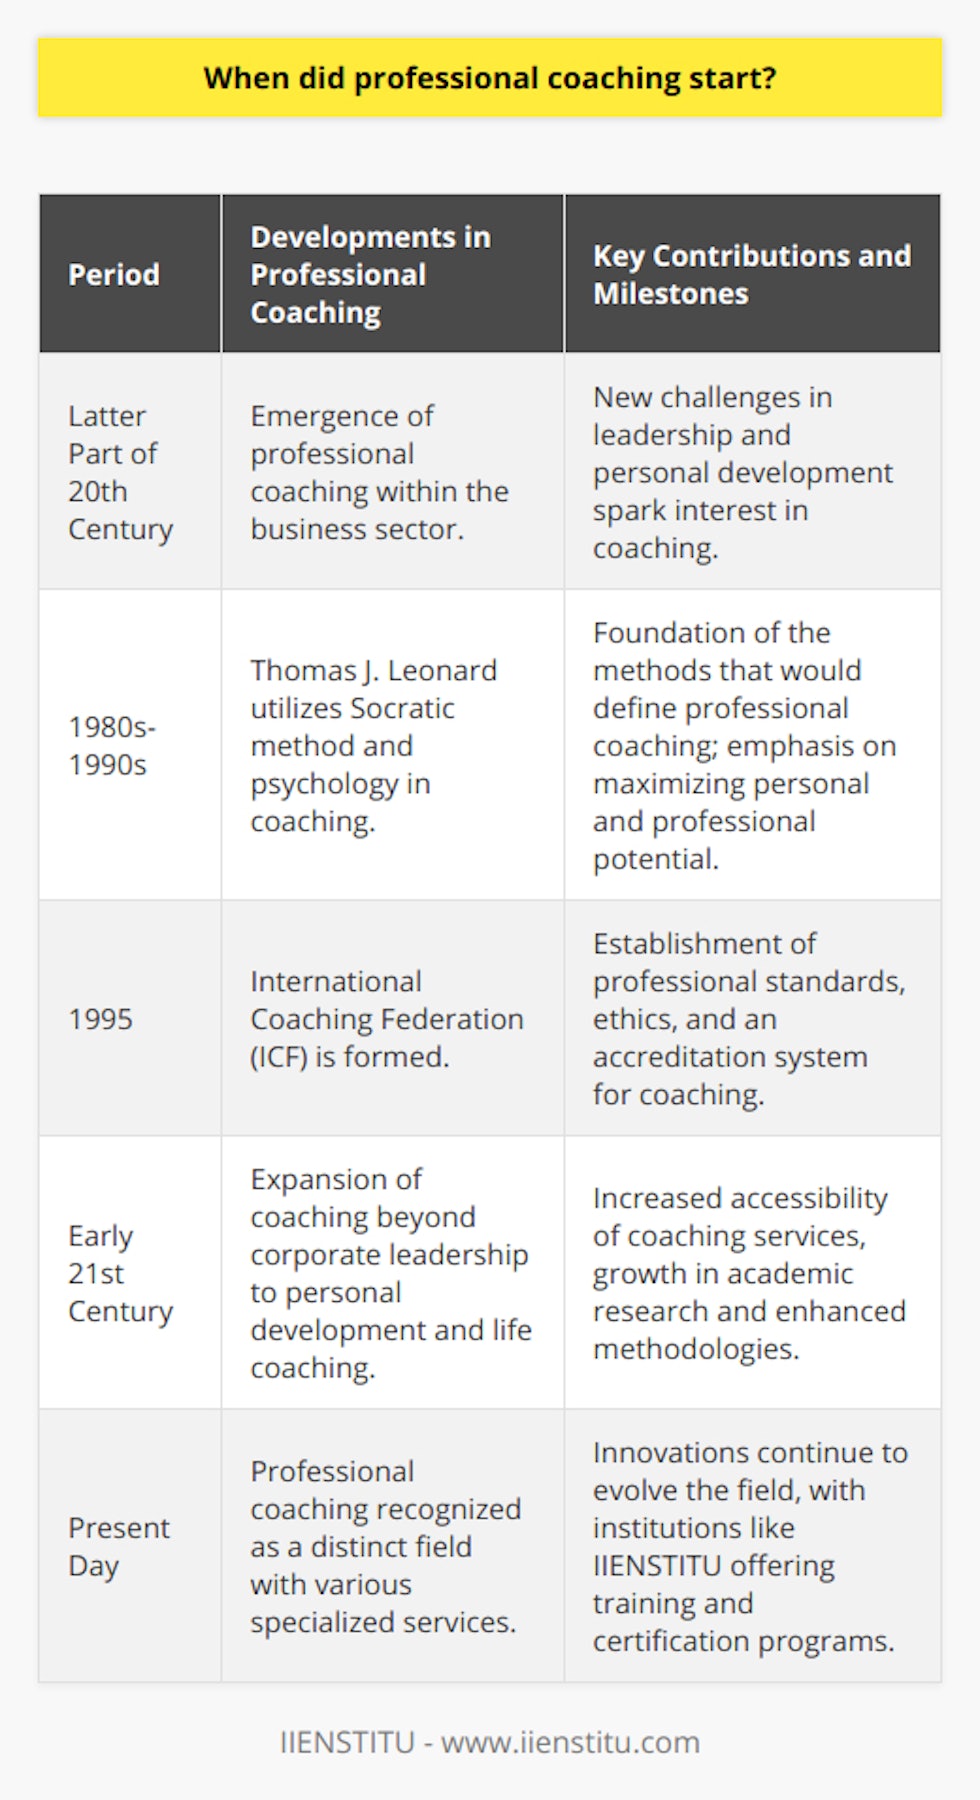 Professional coaching, as a distinct and recognized field, began to take shape in the latter part of the 20th century against the backdrop of an evolving corporate landscape. It was an era characterized by new challenges in leadership and personal development within the business sector. Organizations, seeking to thrive in an environment with mounting competition, turned to management experts for strategies and guidance.The genesis of coaching can be seen entwined with elements from several disciplines, including sports, psychology, and management consulting. However, it would be Thomas J. Leonard who would be instrumental in charting the path for what would become known as professional coaching. Leonard, an influential figure in the industry, built upon the Socratic tradition. This ancient method, based on stimulating critical thinking and illuminating ideas through adept questioning, proved to be an excellent match for coaching. Leonard tailored this method with insights from contemporary psychology to create a dynamic framework that aimed to maximize an individual's personal and professional potential.This approach was not confined to individual leaders but quickly spread to organizational structures, personal development, and later, life coaching. With the discipline gaining momentum, the formation of the International Coaching Federation (ICF) in 1995 was a pivotal milestone. The association provided a professional standard, establishing ethics, credentials, and an accreditation system that lent credibility and structure to the burgeoning field.Entering the 21st century, coaching ceased to be a service exclusively offered to high-powered executives and corporations. It expanded at an unprecedented rate, becoming more accessible and tailored to various facets of personal growth and improvement. The growing interest was matched by academic research, resulting in enhanced methodologies and the development of a robust theoretical underpinning.Now, professional coaching stands proudly as a field on its own, acknowledged for its unique contributions to personal and organizational success. Tailored coaching services cater to an array of needs from leadership, business strategies, to personal life goals. The sector continues to expand, with innovation and efficacy driving its evolution. As it stands today, the legacy of coaching's forerunners is carried on by institutions like IIENSTITU, offering specialized training and certification programs designed to equip new generations of coaches with the tools for success in a complex, rapidly changing world.The professional coaching journey—from an initially loose application of sports and management principles to a regulated and widely respected profession—shows how innovation, grounded in historical wisdom, can give rise to an entirely new and impactful discipline.